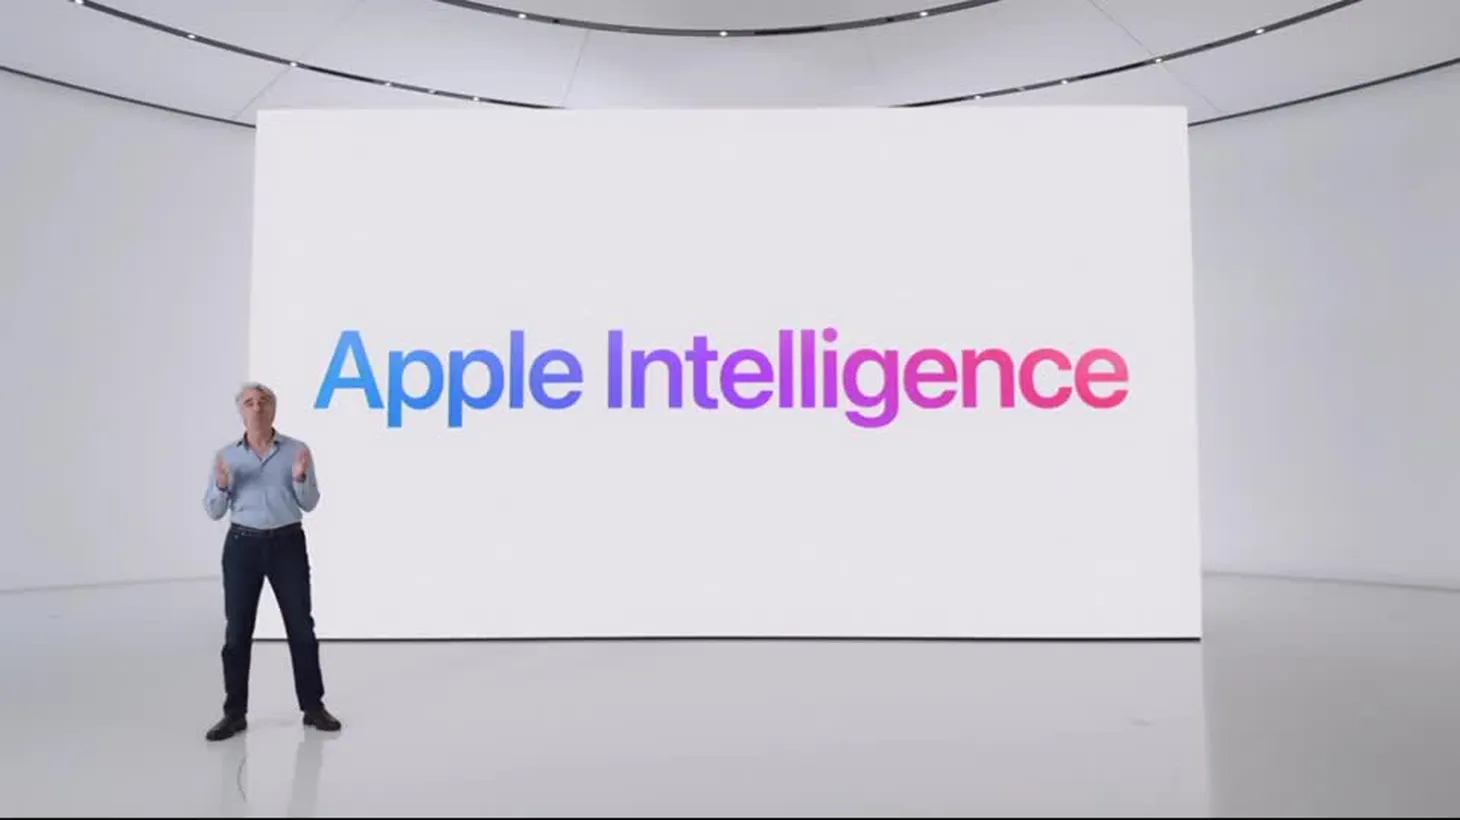 Apple Intelligence launches in September, vowing to use generative models to aid users with everyday tasks.